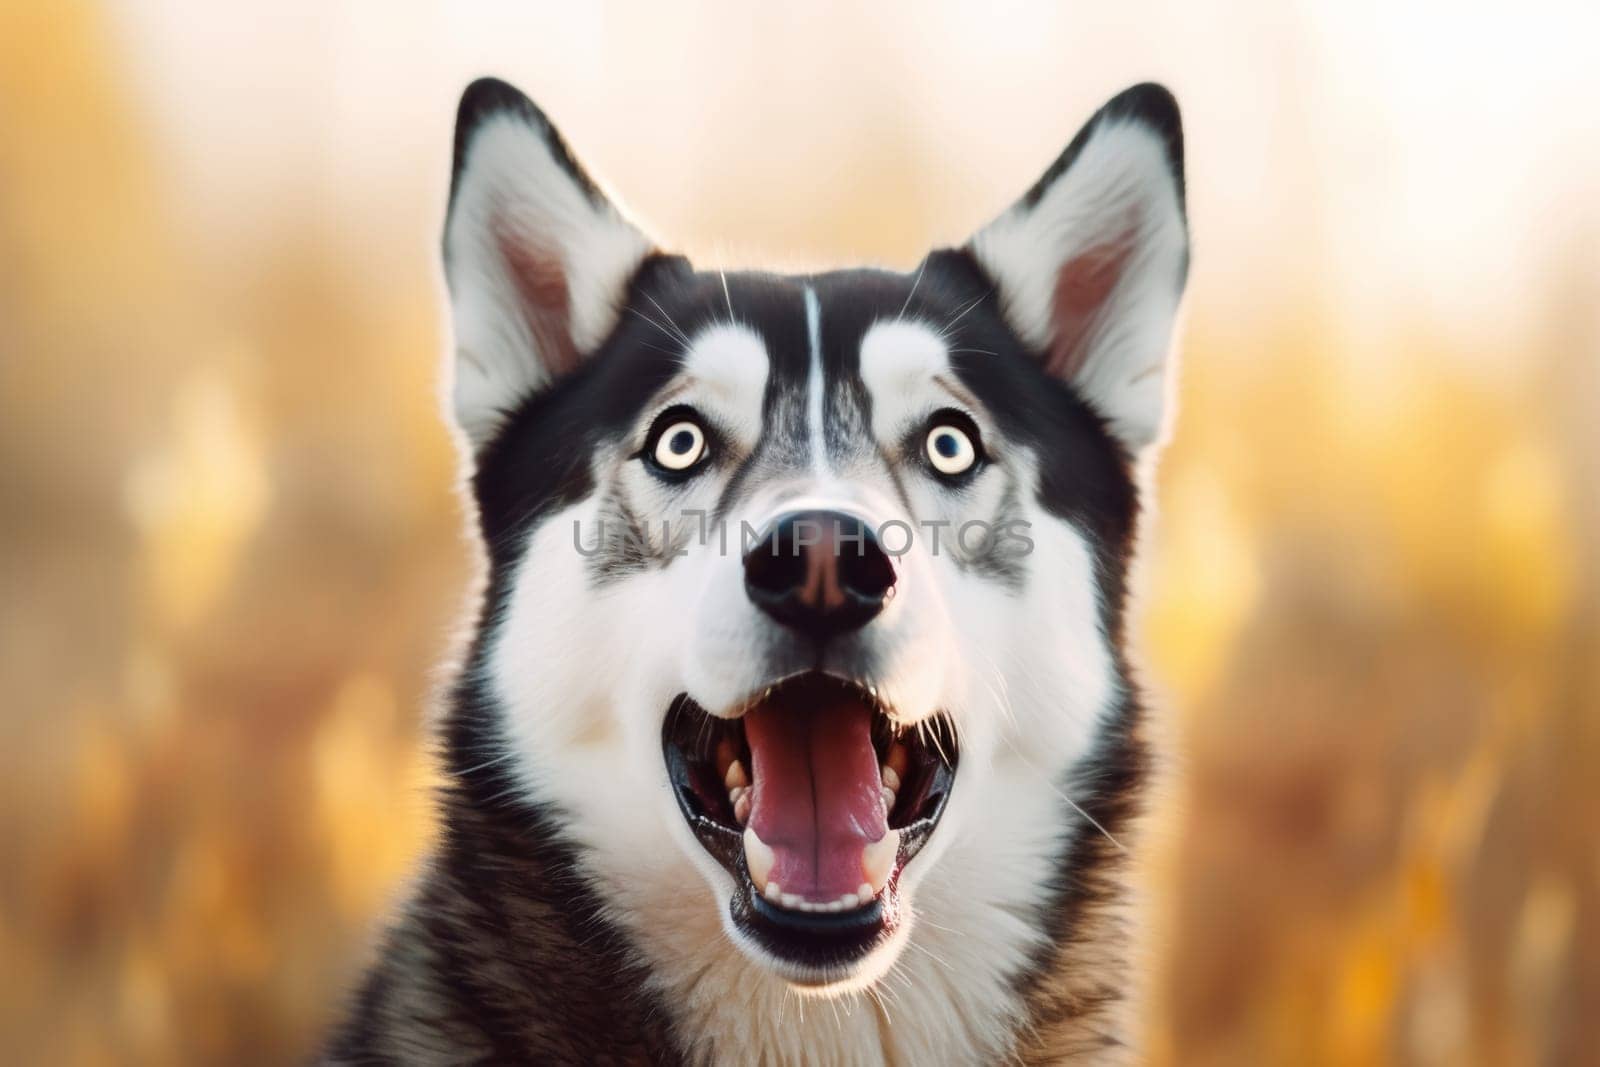 Close-up of a Siberian Husky with captivating blue eyes and a playful expression, set against a warm blurred background